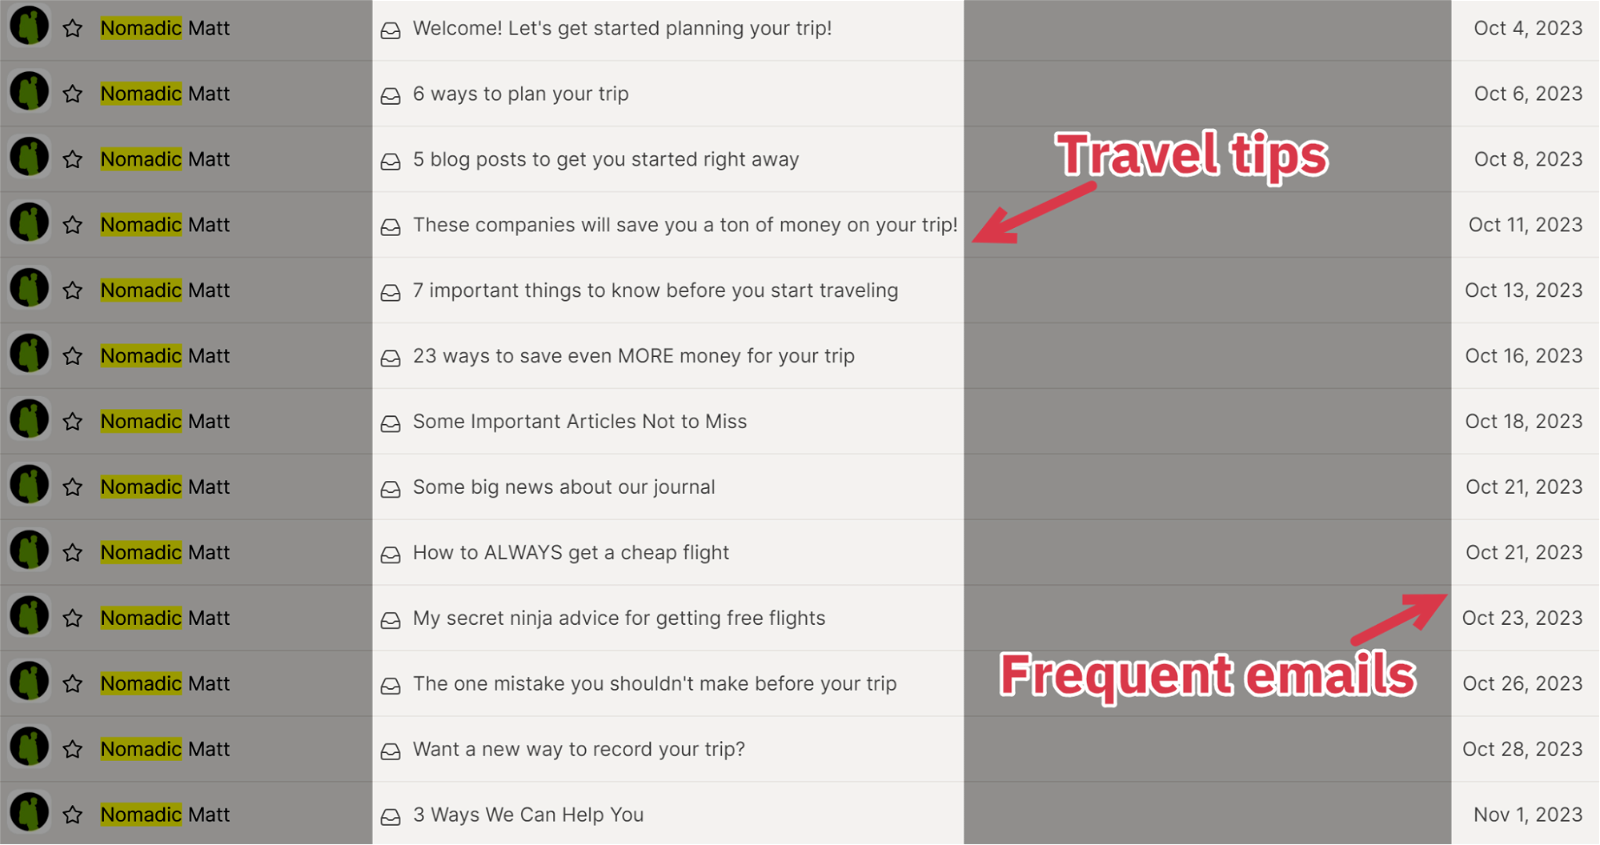 personal travel blog examples